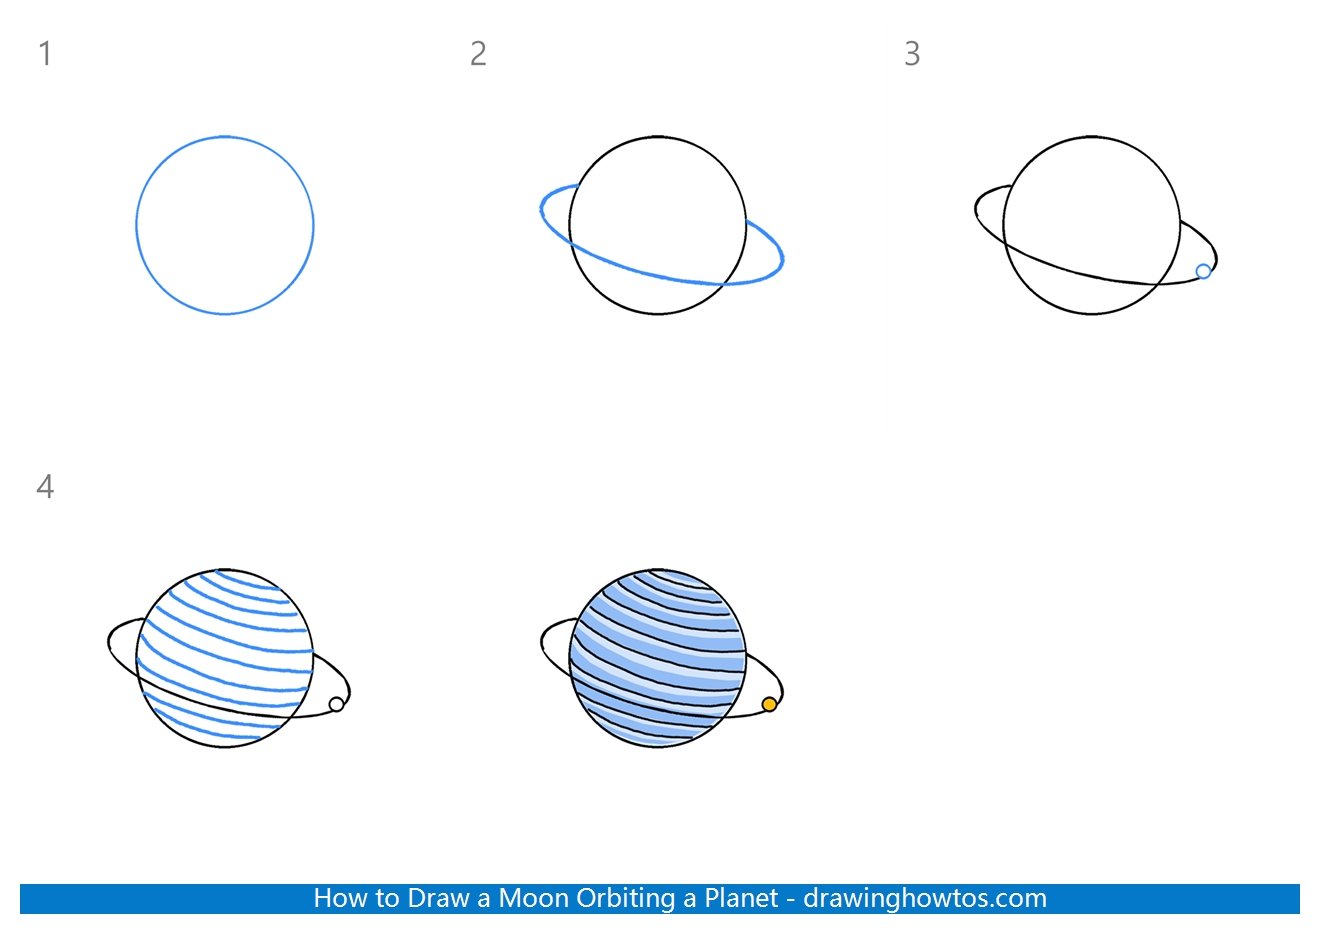 How to Draw a Moon Orbiting a Planet Step by Step